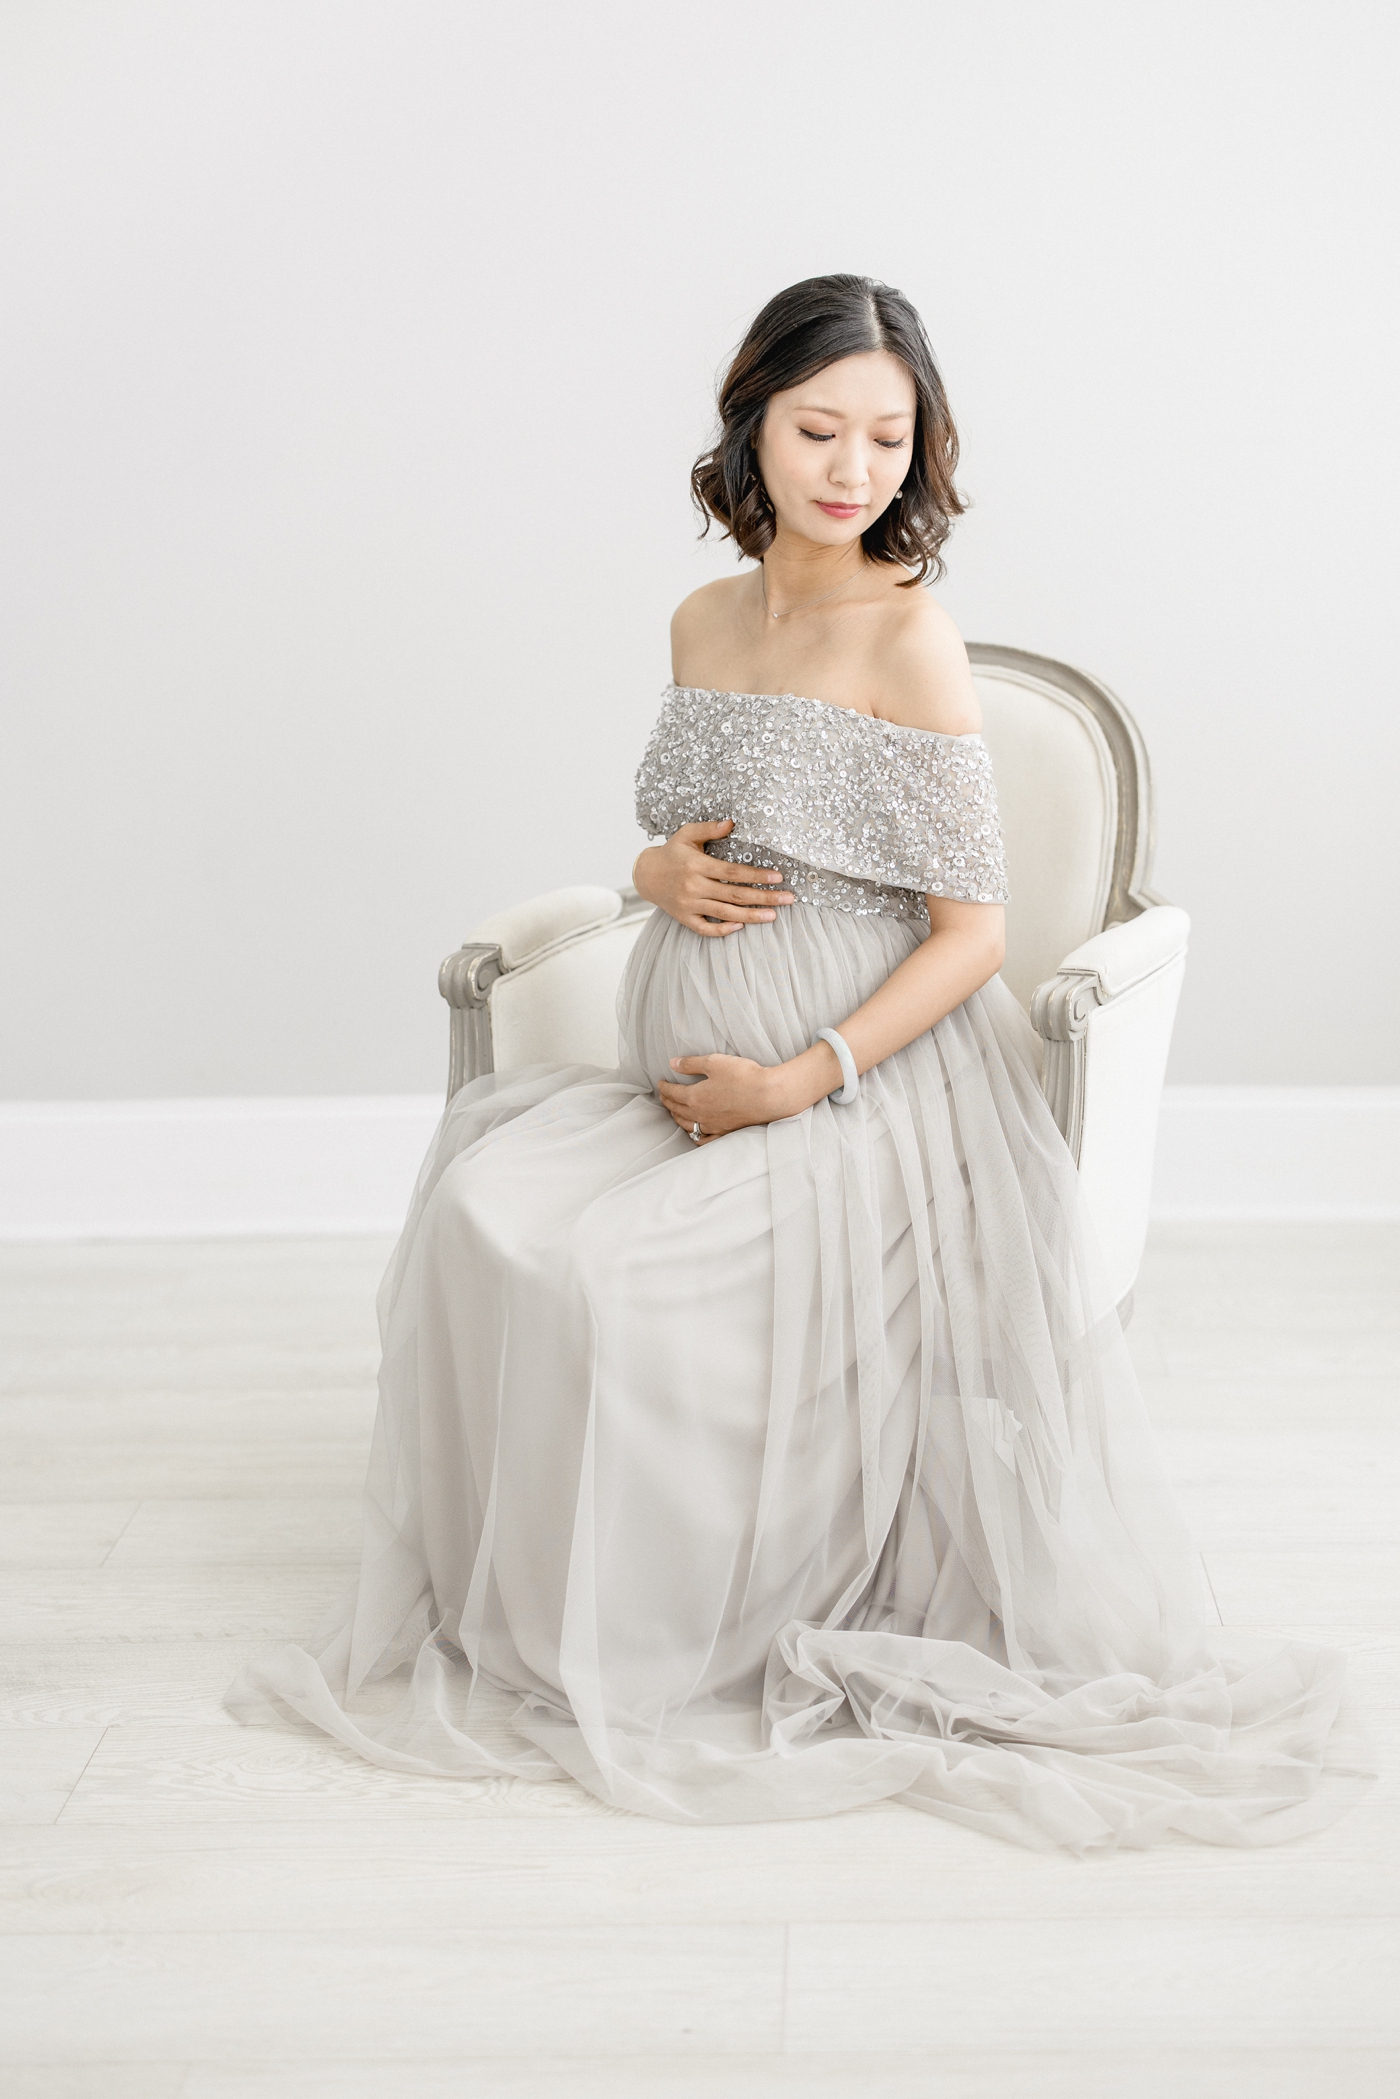 Classic maternity portraits taken in Tampa Bay studio. Photo by Brittany Elise Photography.